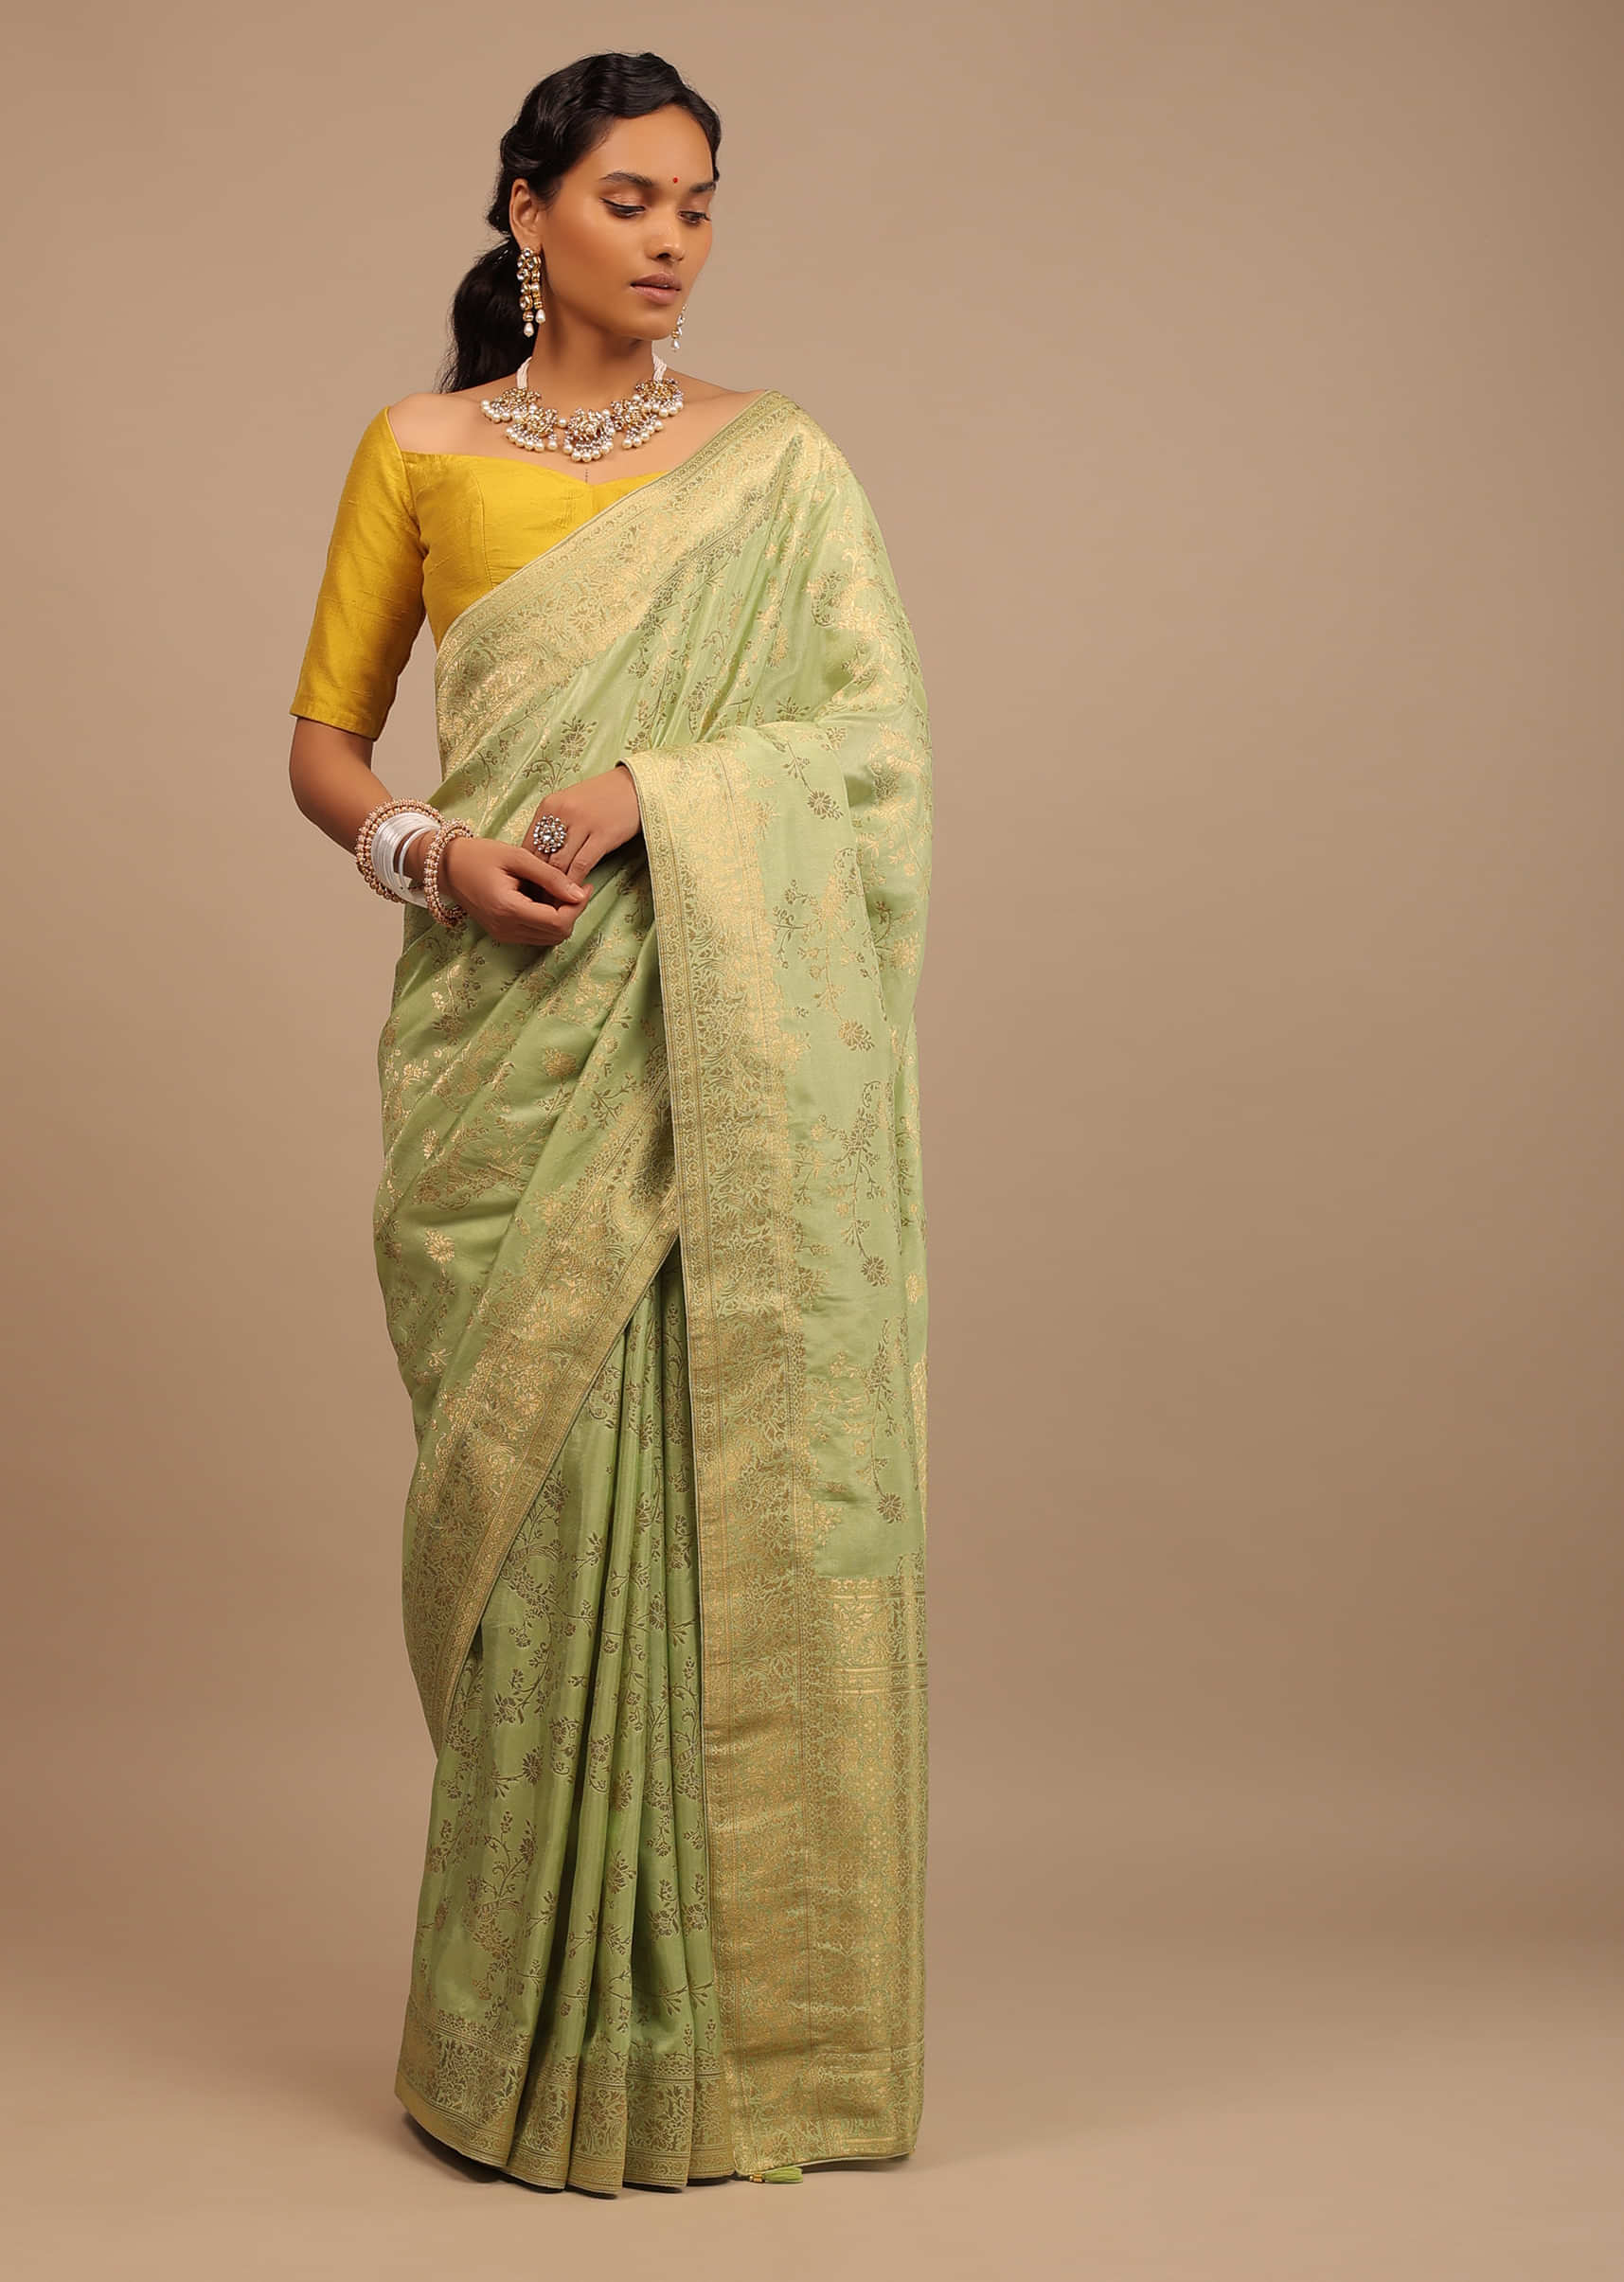 Sap Green Saree In Dola Silk With Woven Floral Jaal And Moroccan Weave On The Pallu